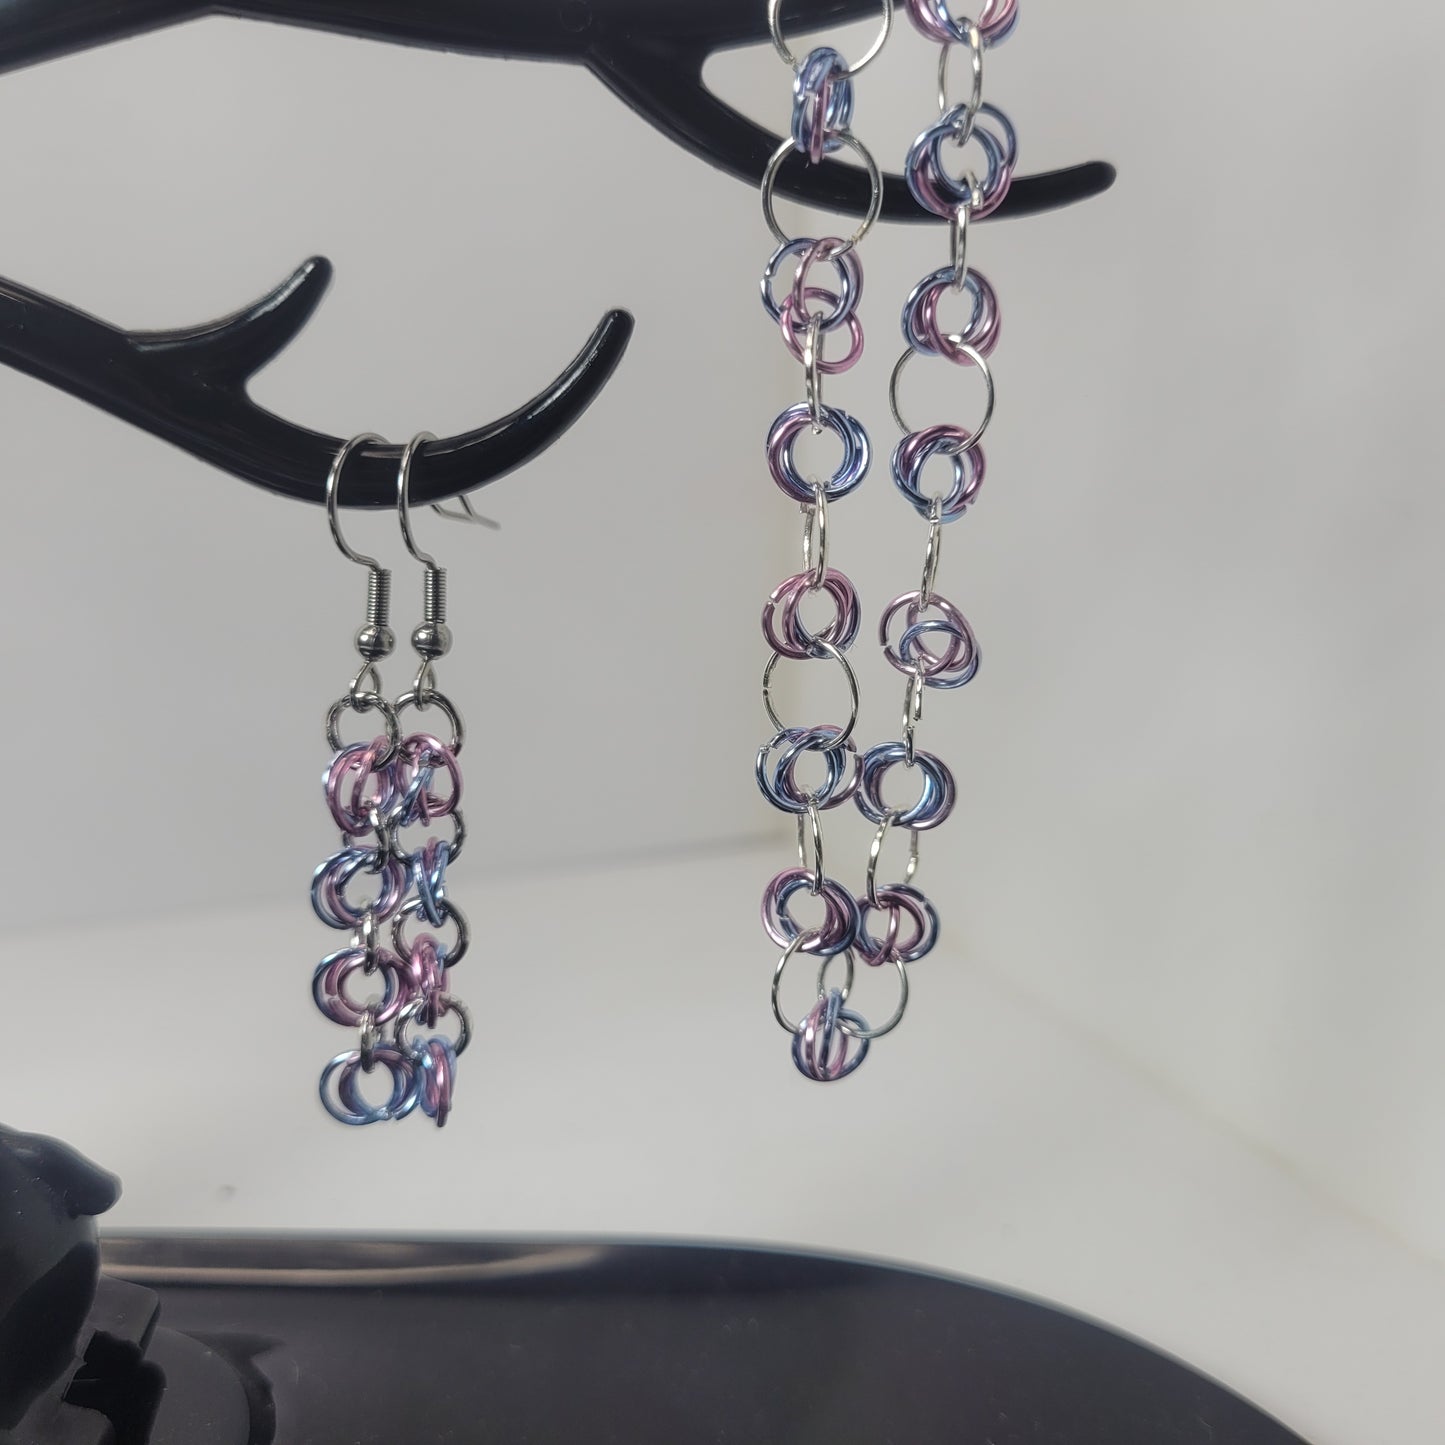 Bracelet and earring set, light pink, blue and silver chainmail